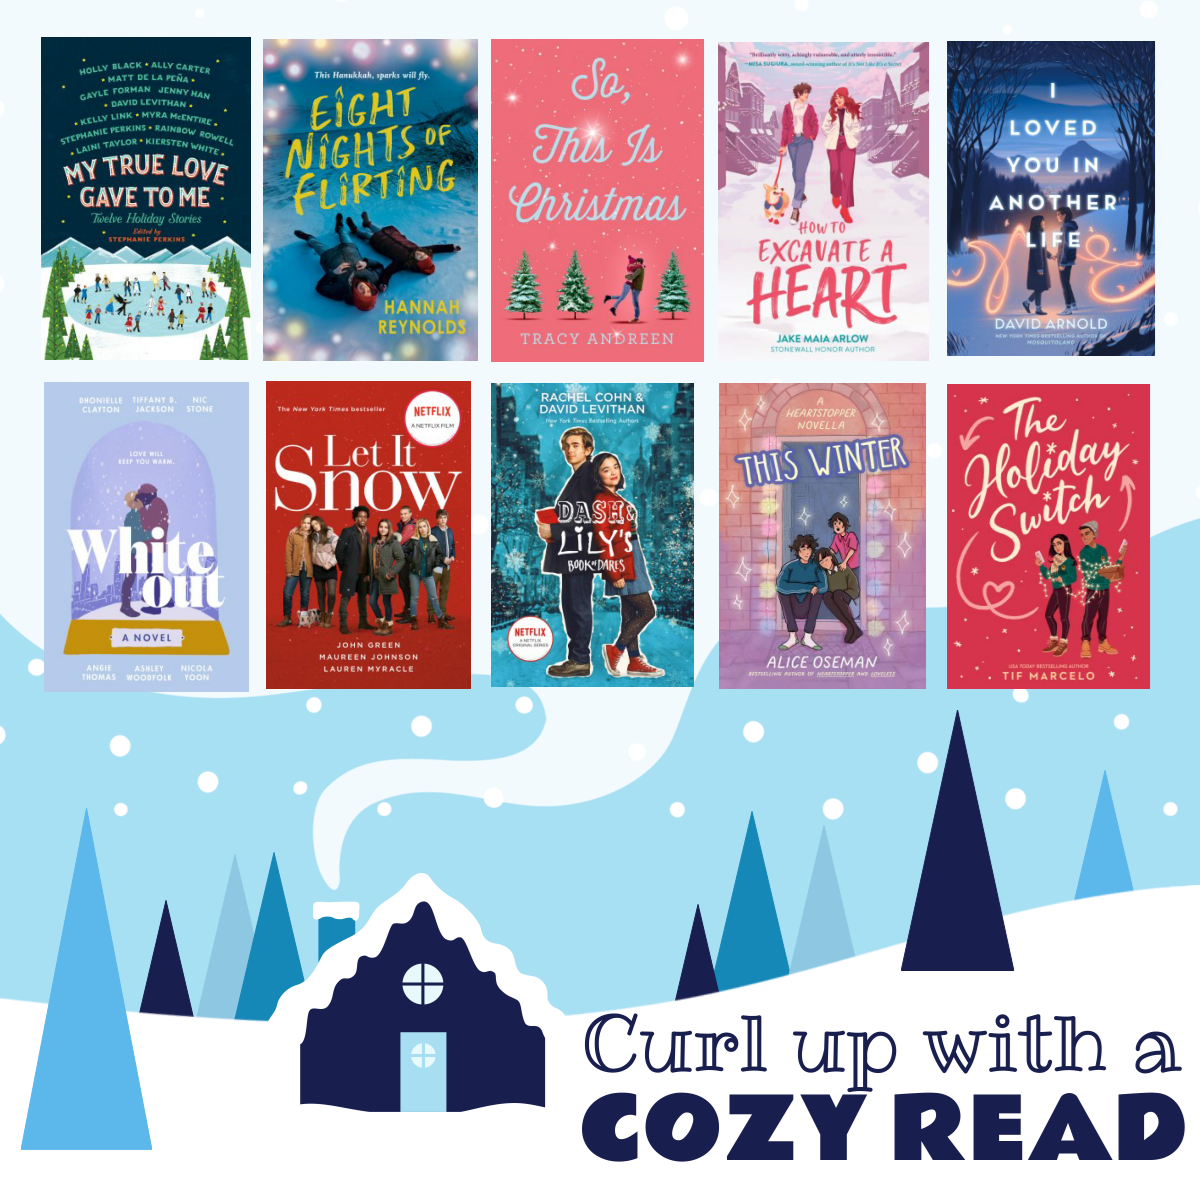 Text reads, "Curl up with a cozy read". Image is of a snow covered house with trees and 10 book covers. 